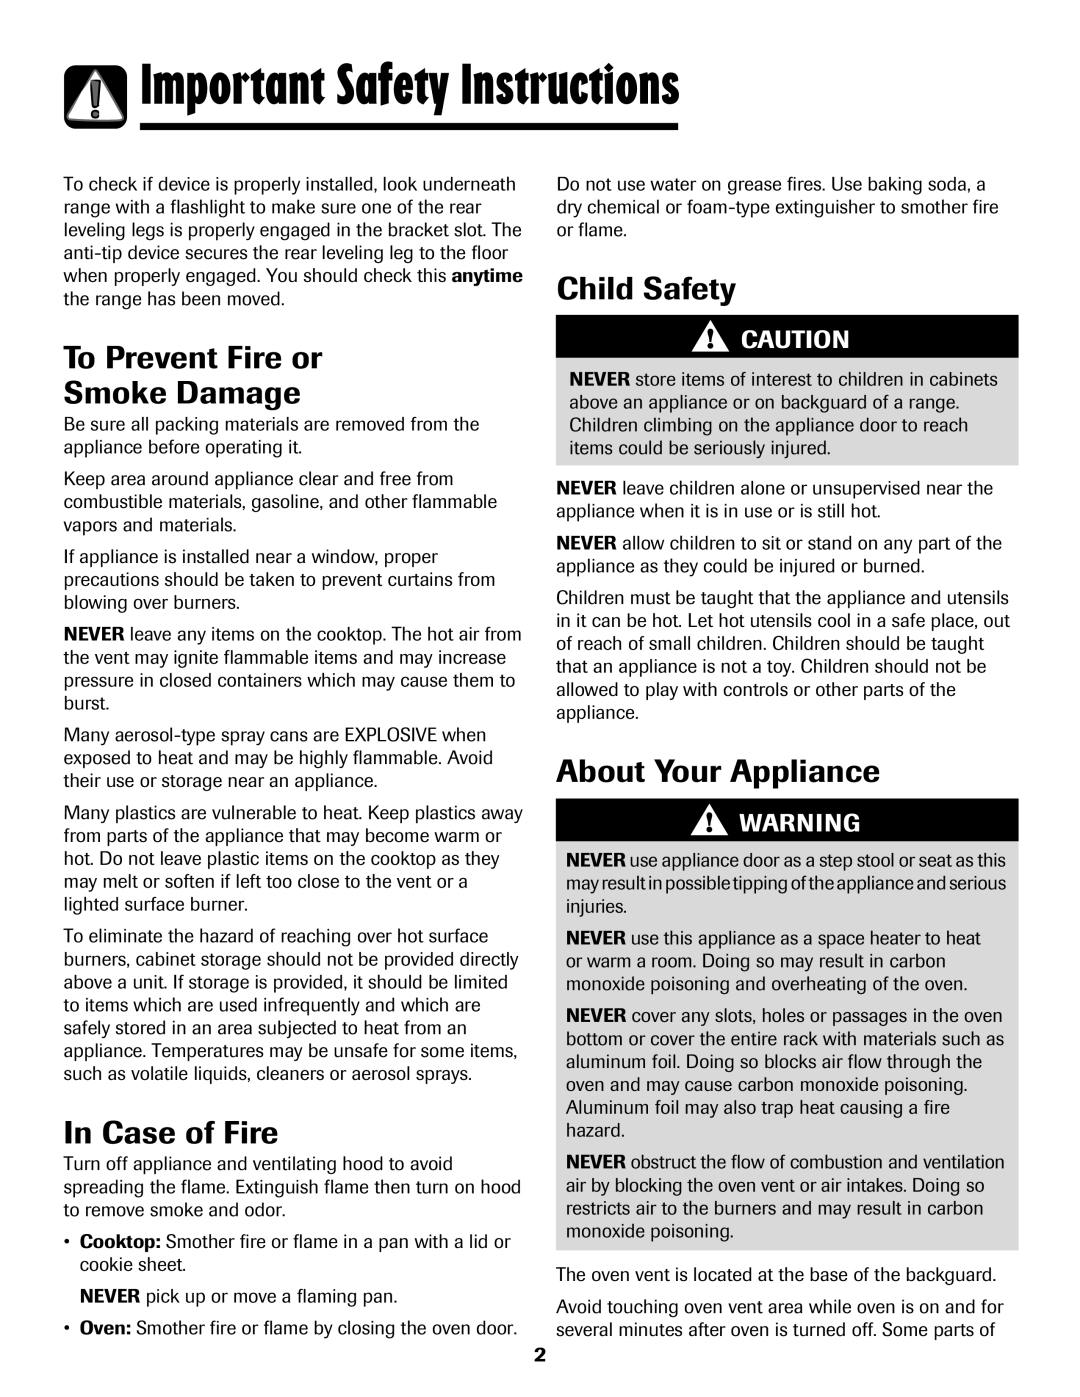 Maytag Gas - Precision Touch Control 500 Range Important Safety Instructions, To Prevent Fire or Smoke Damage 